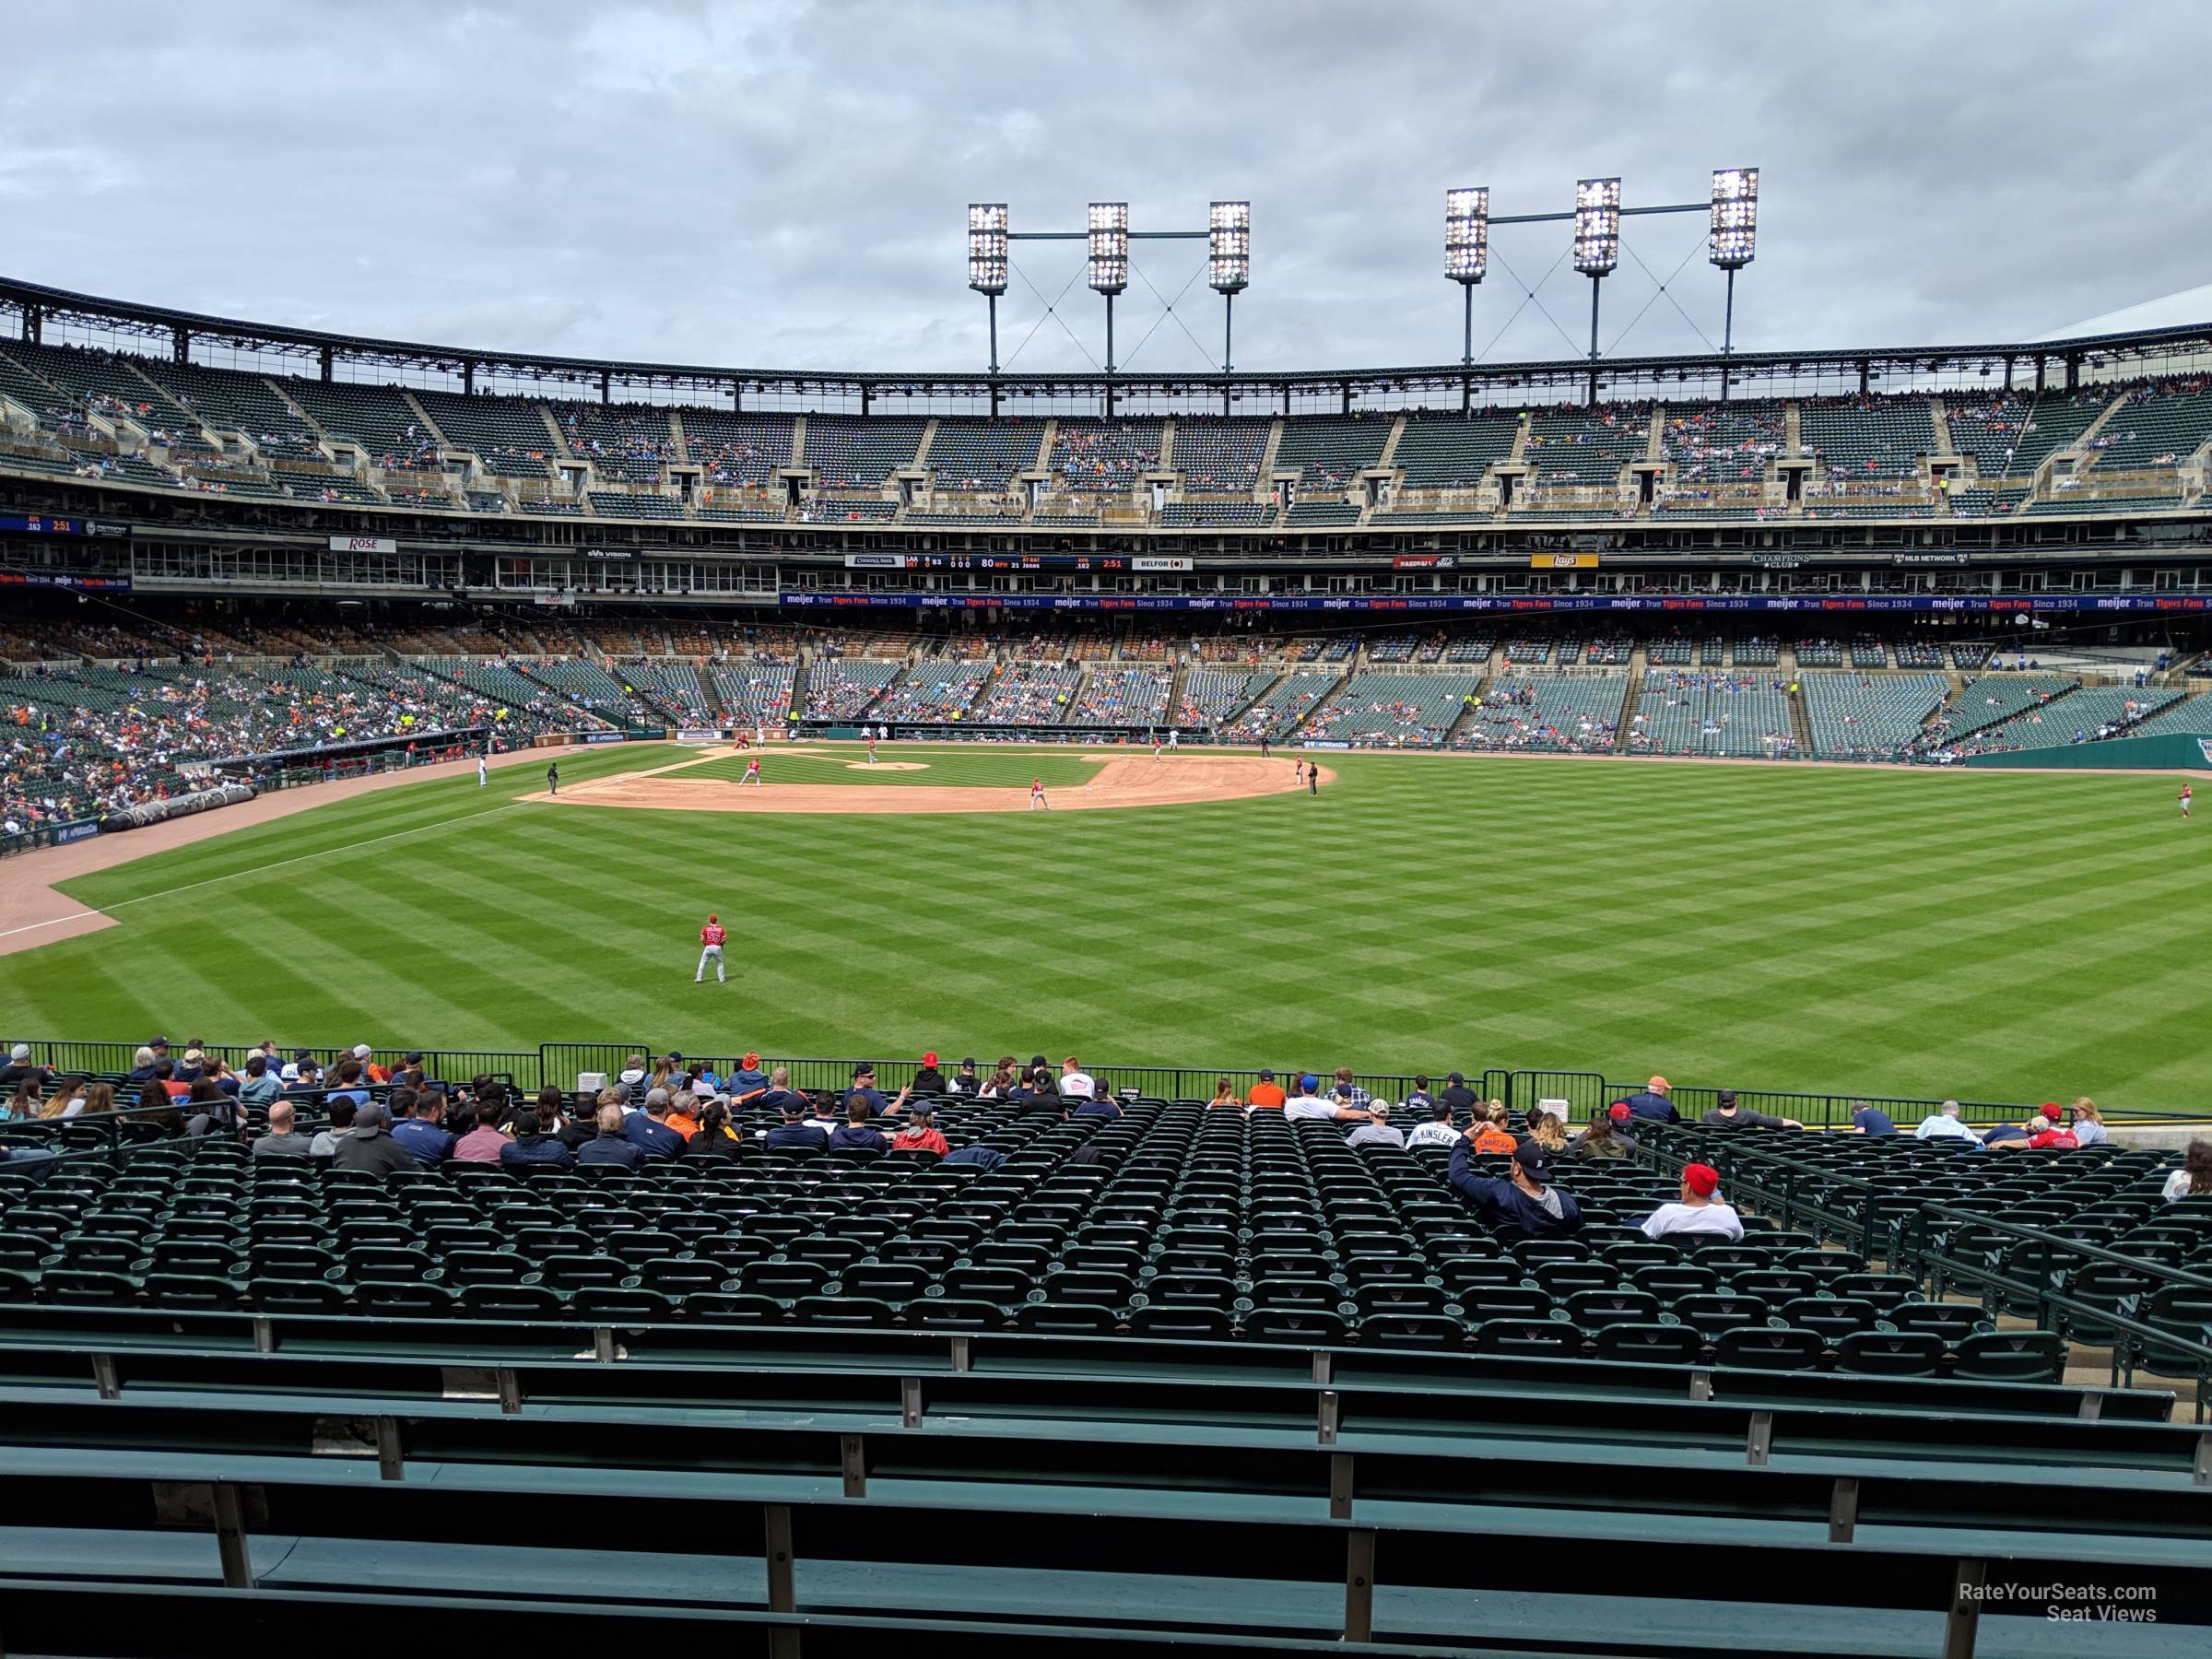 Section 104 at Comerica Park 